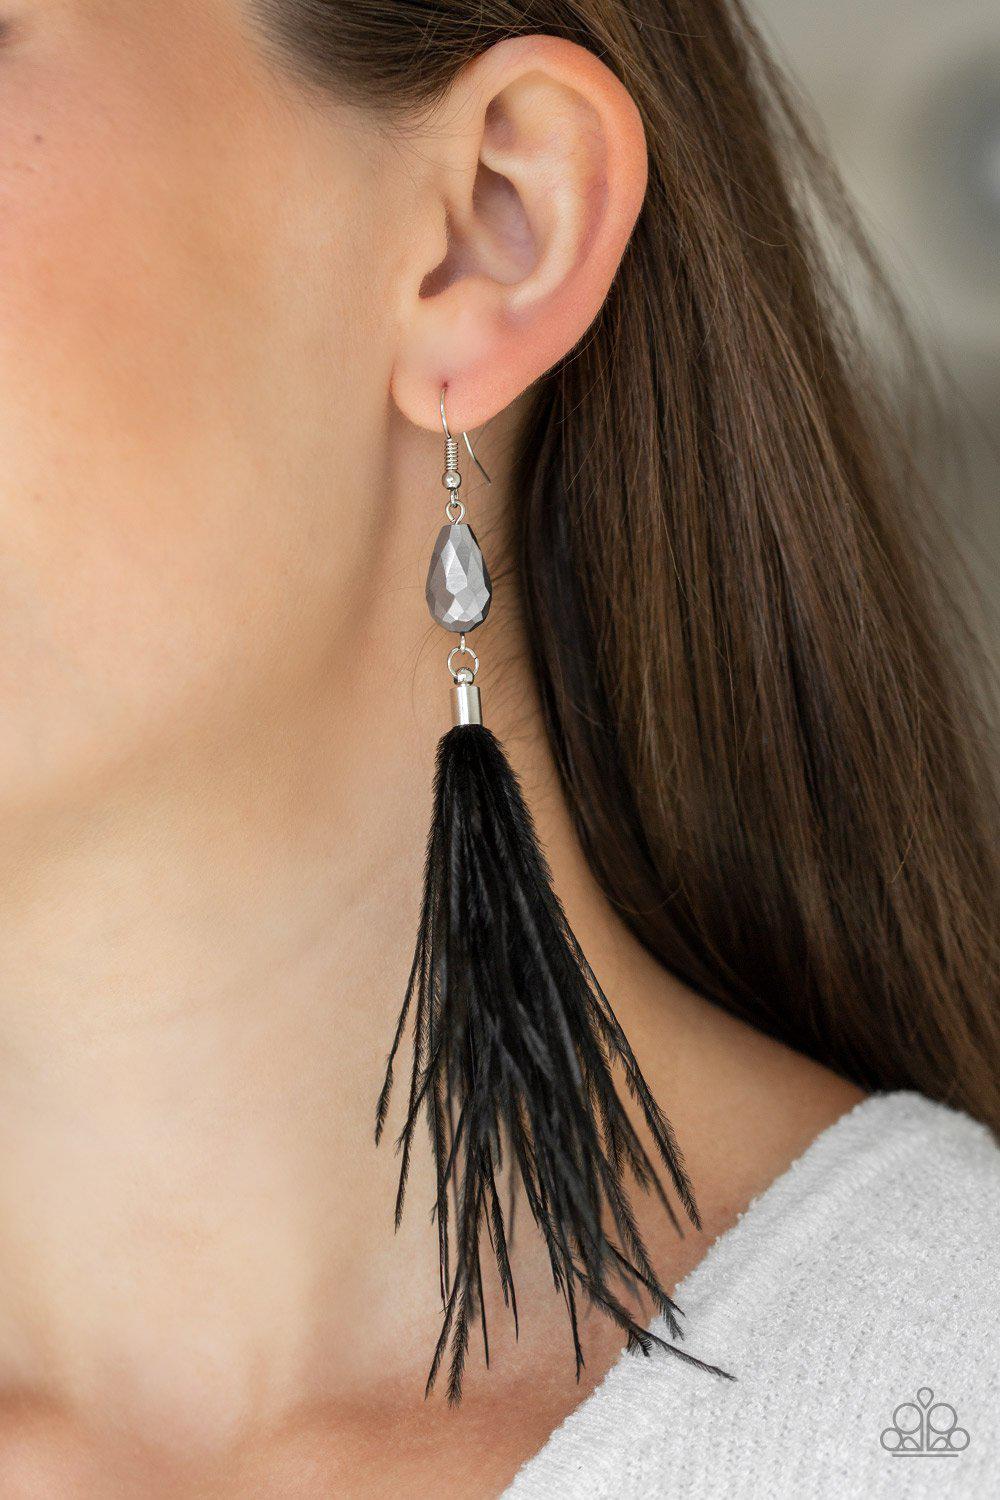 Showgirl Showcase Black Feather Earrings - Paparazzi Accessories-CarasShop.com - $5 Jewelry by Cara Jewels